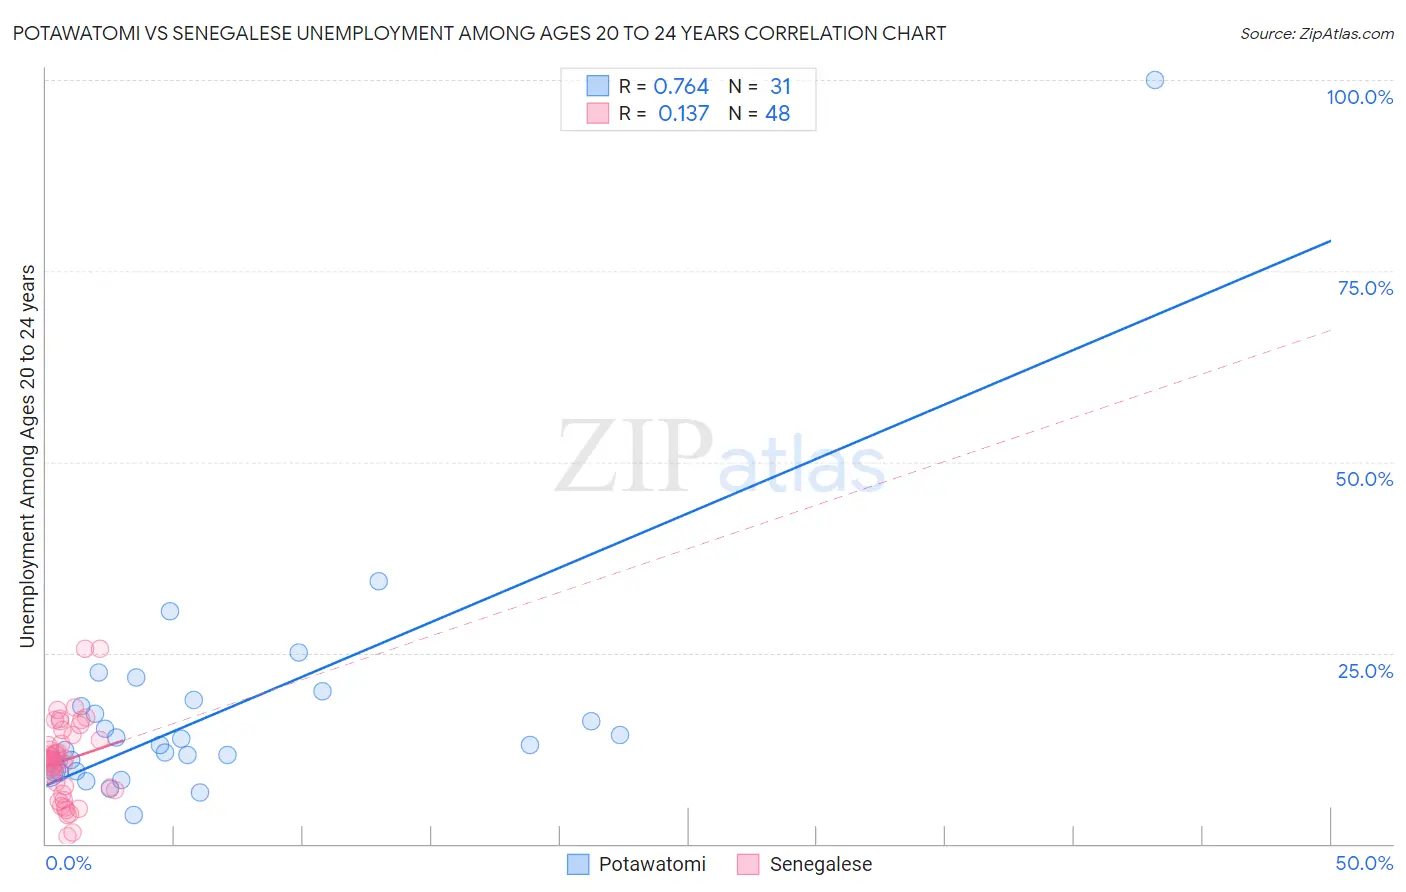 Potawatomi vs Senegalese Unemployment Among Ages 20 to 24 years